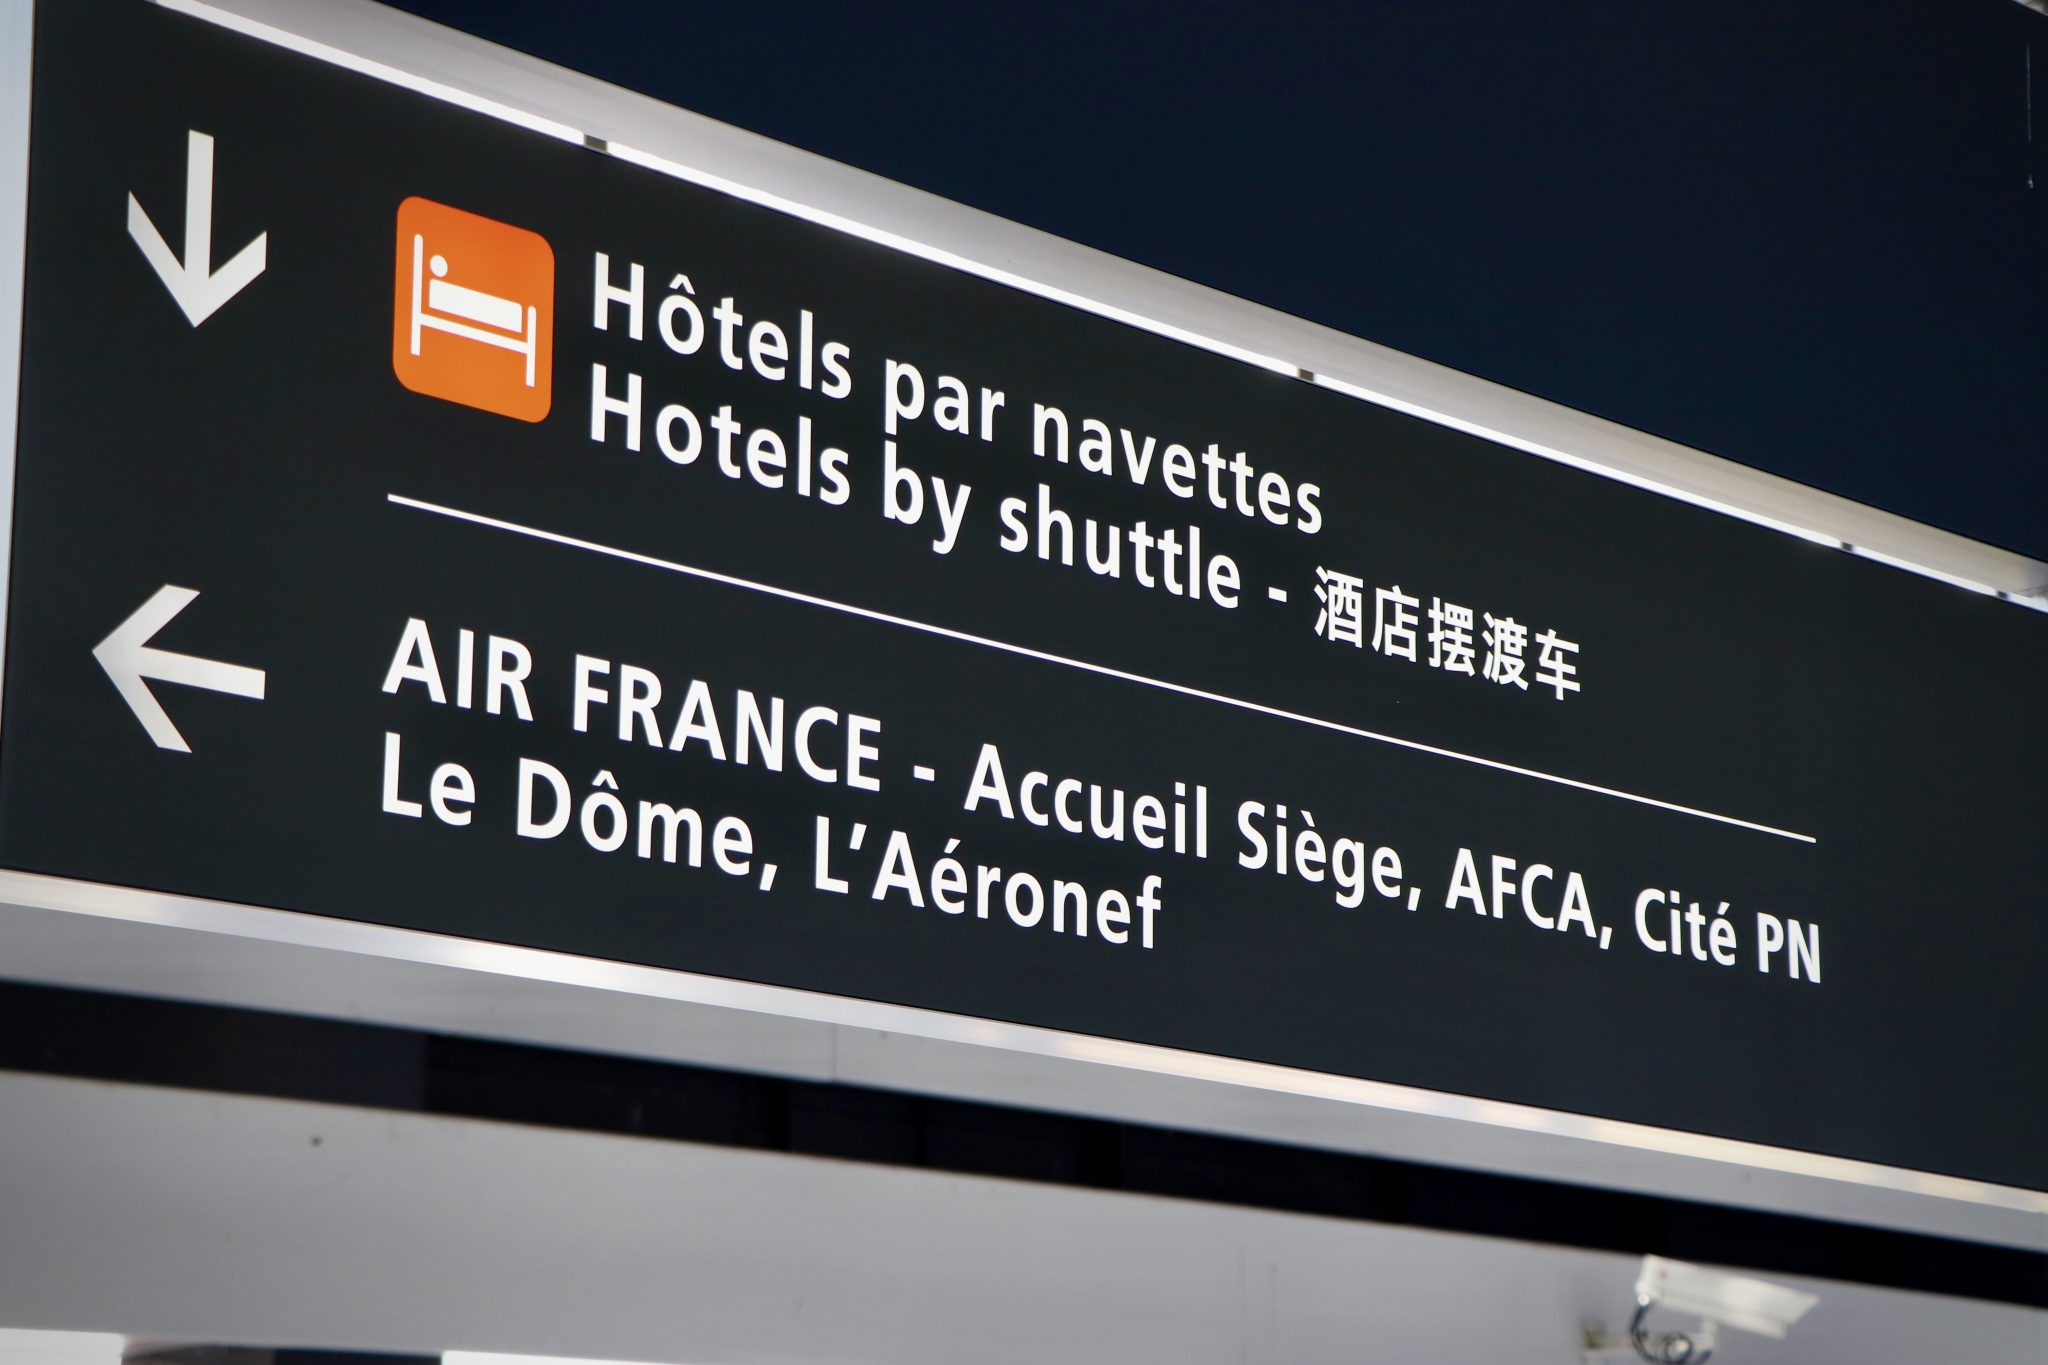 Directions from CDG terminals to hotels